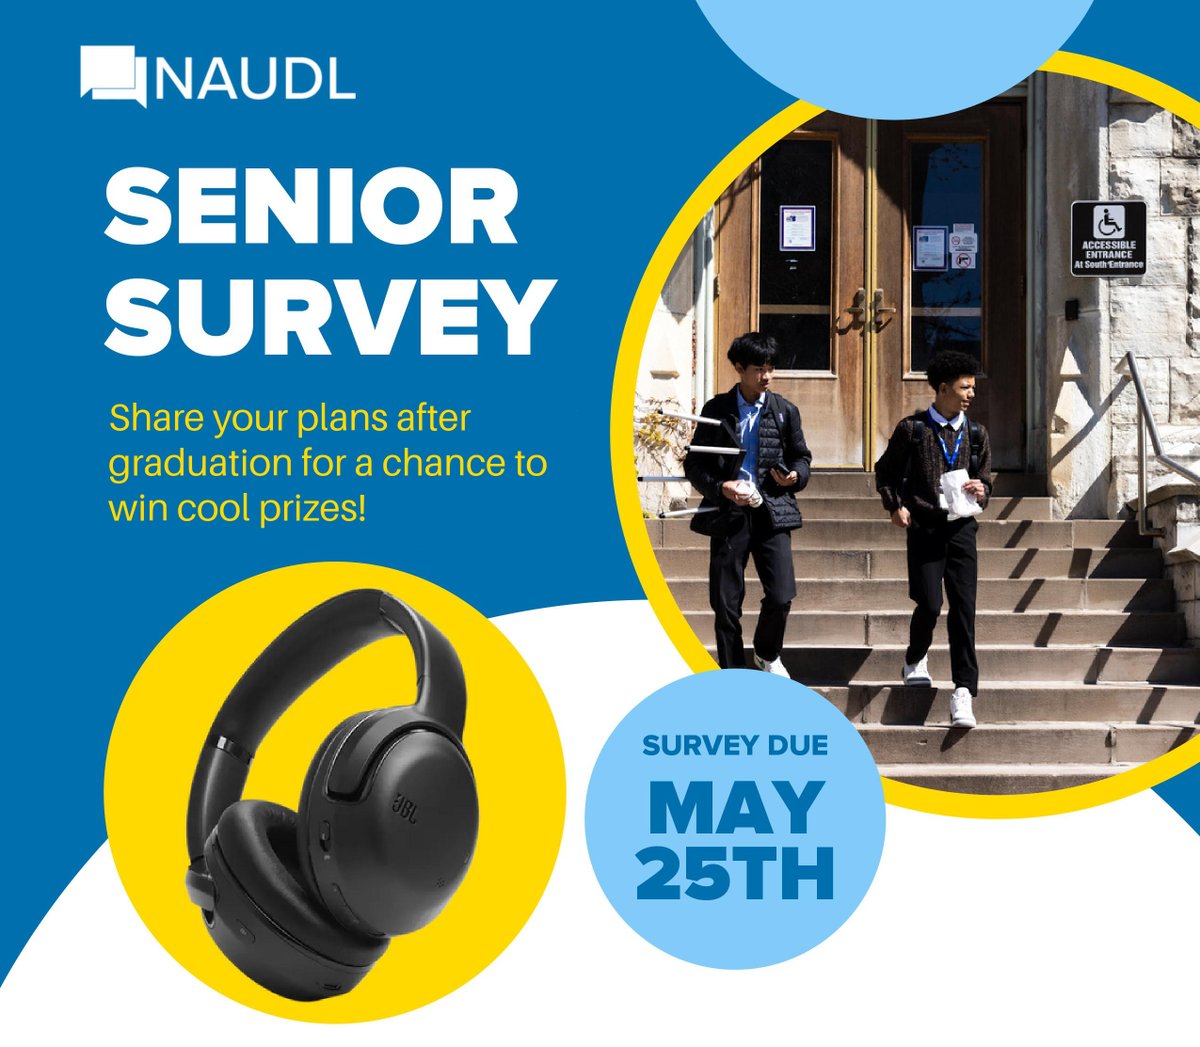 Calling seniors! NAUDL wants to know your post-graduation plans and is offering fun raffle prizes for participating. Please complete the quick survey here: naudl.tfaforms.net/5072218 Once completed you will be entered in two raffles.